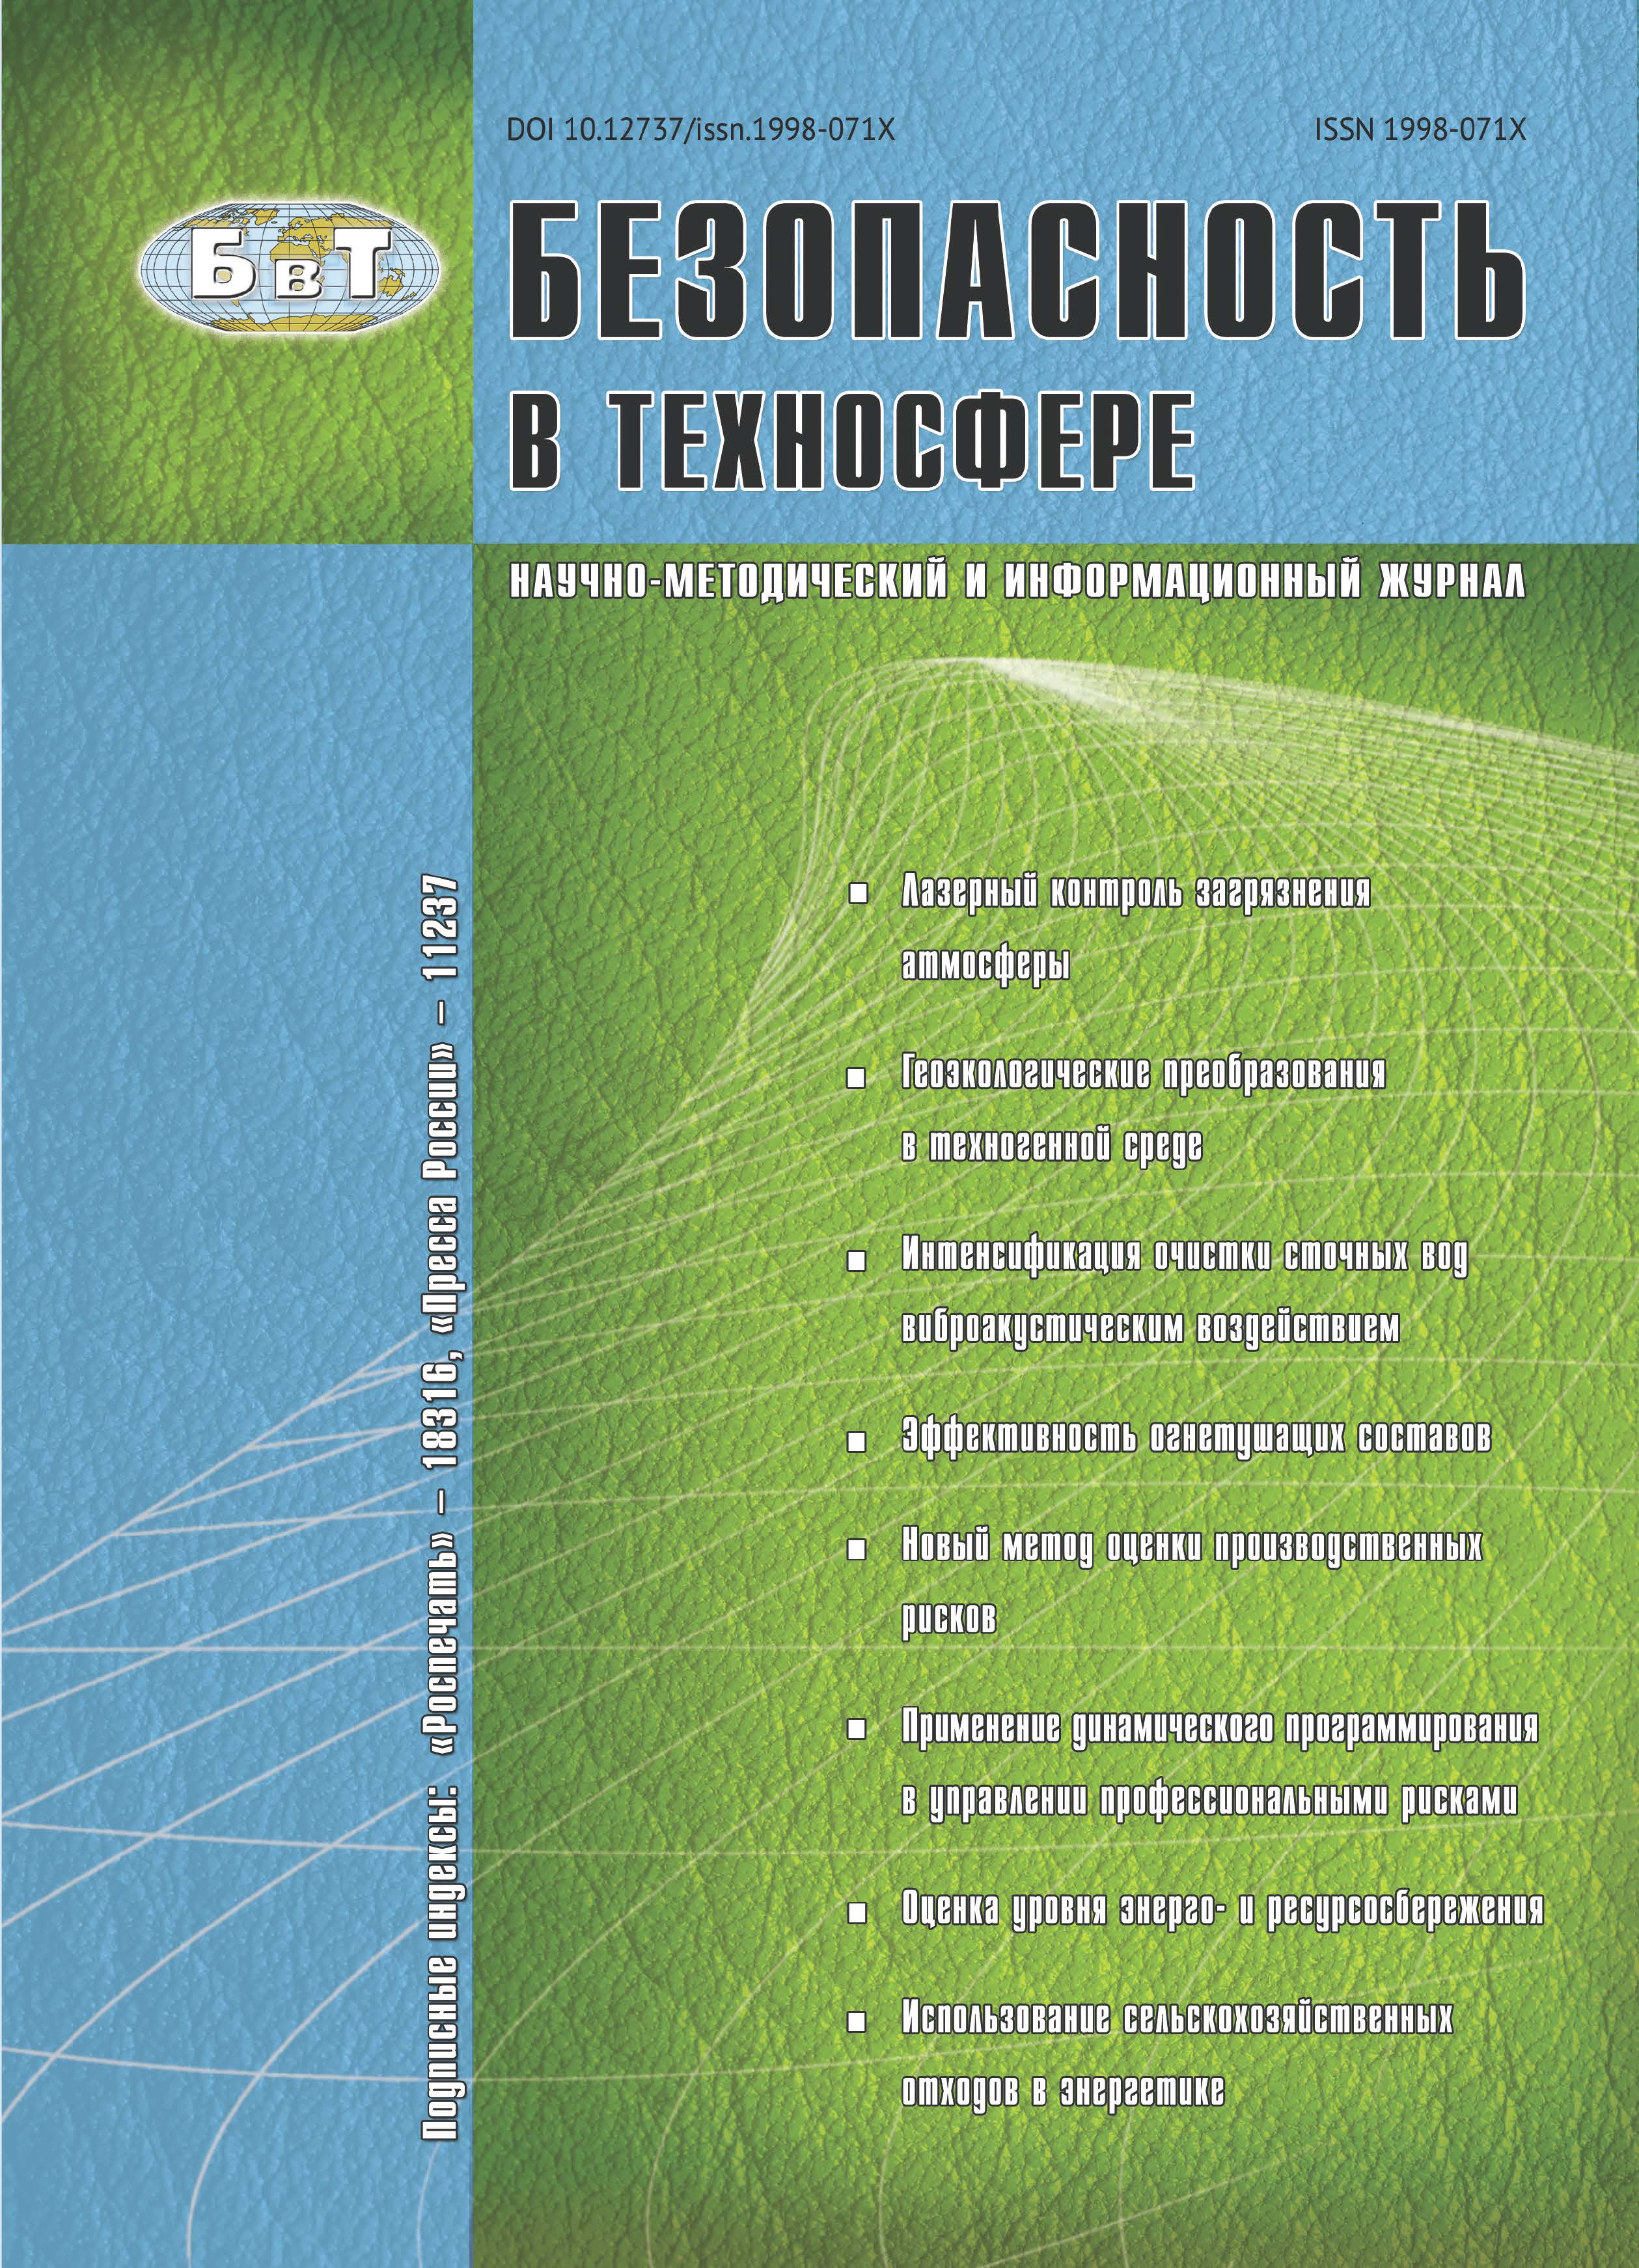                         Geoengineering: Spread Areas, Technosphere Safety Aspects and Management Characteristics
            